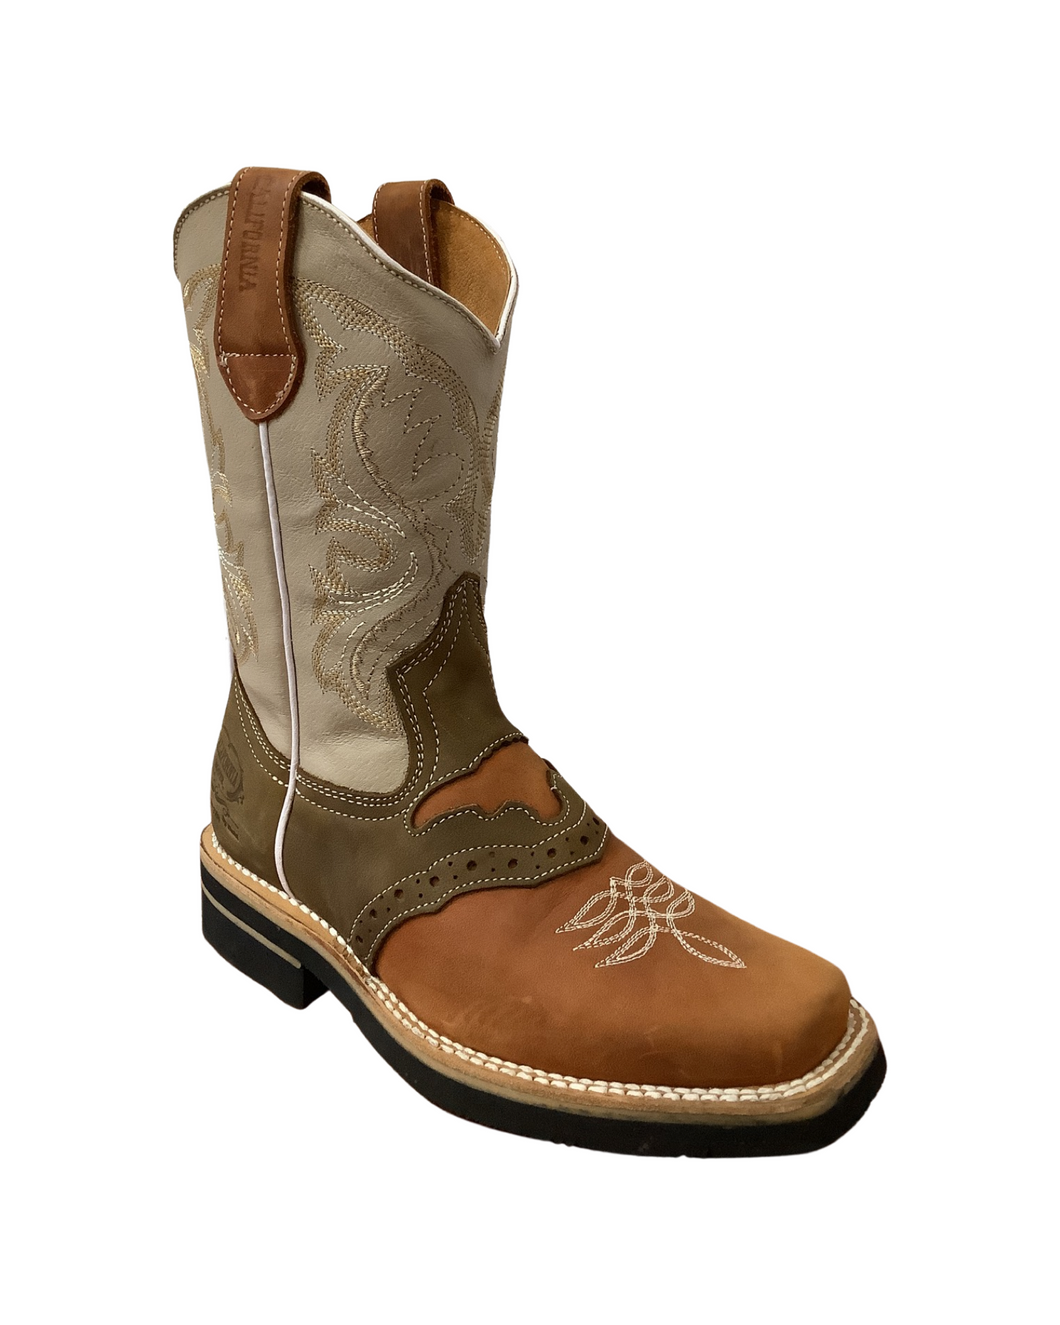 Chaparral 454 Shedron Joven  Boot